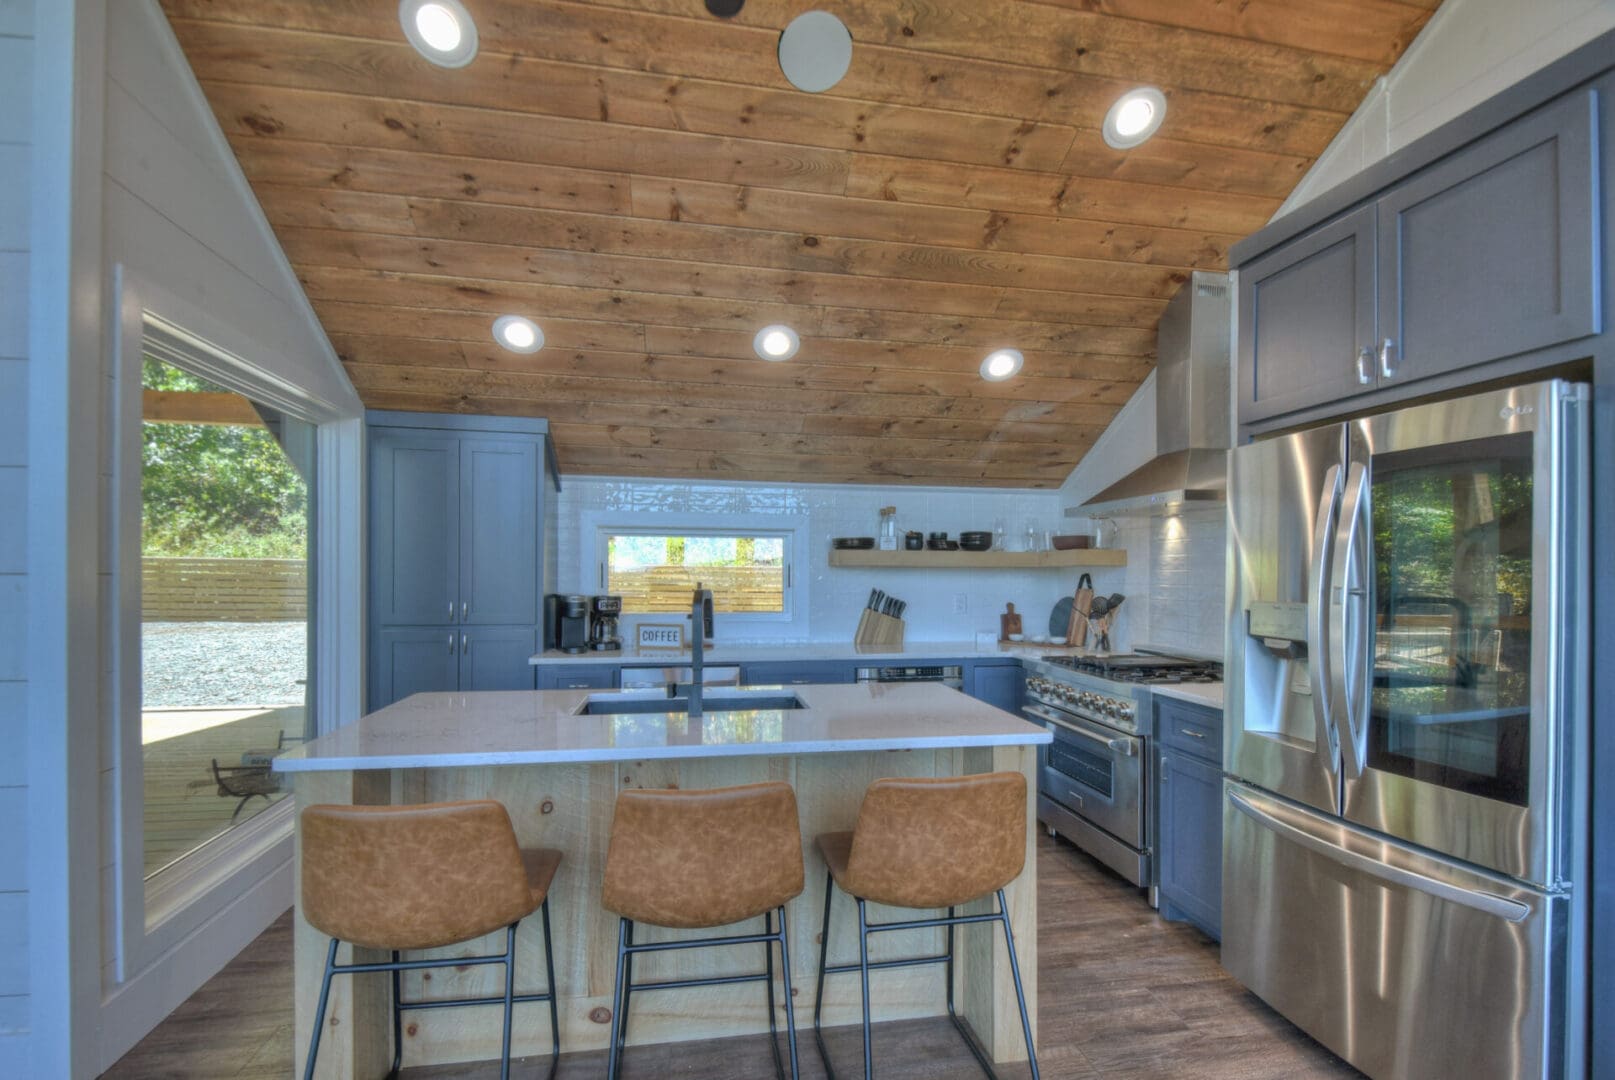 A kitchen in a tiny house with wood ceilings designed by Architectural Design services.